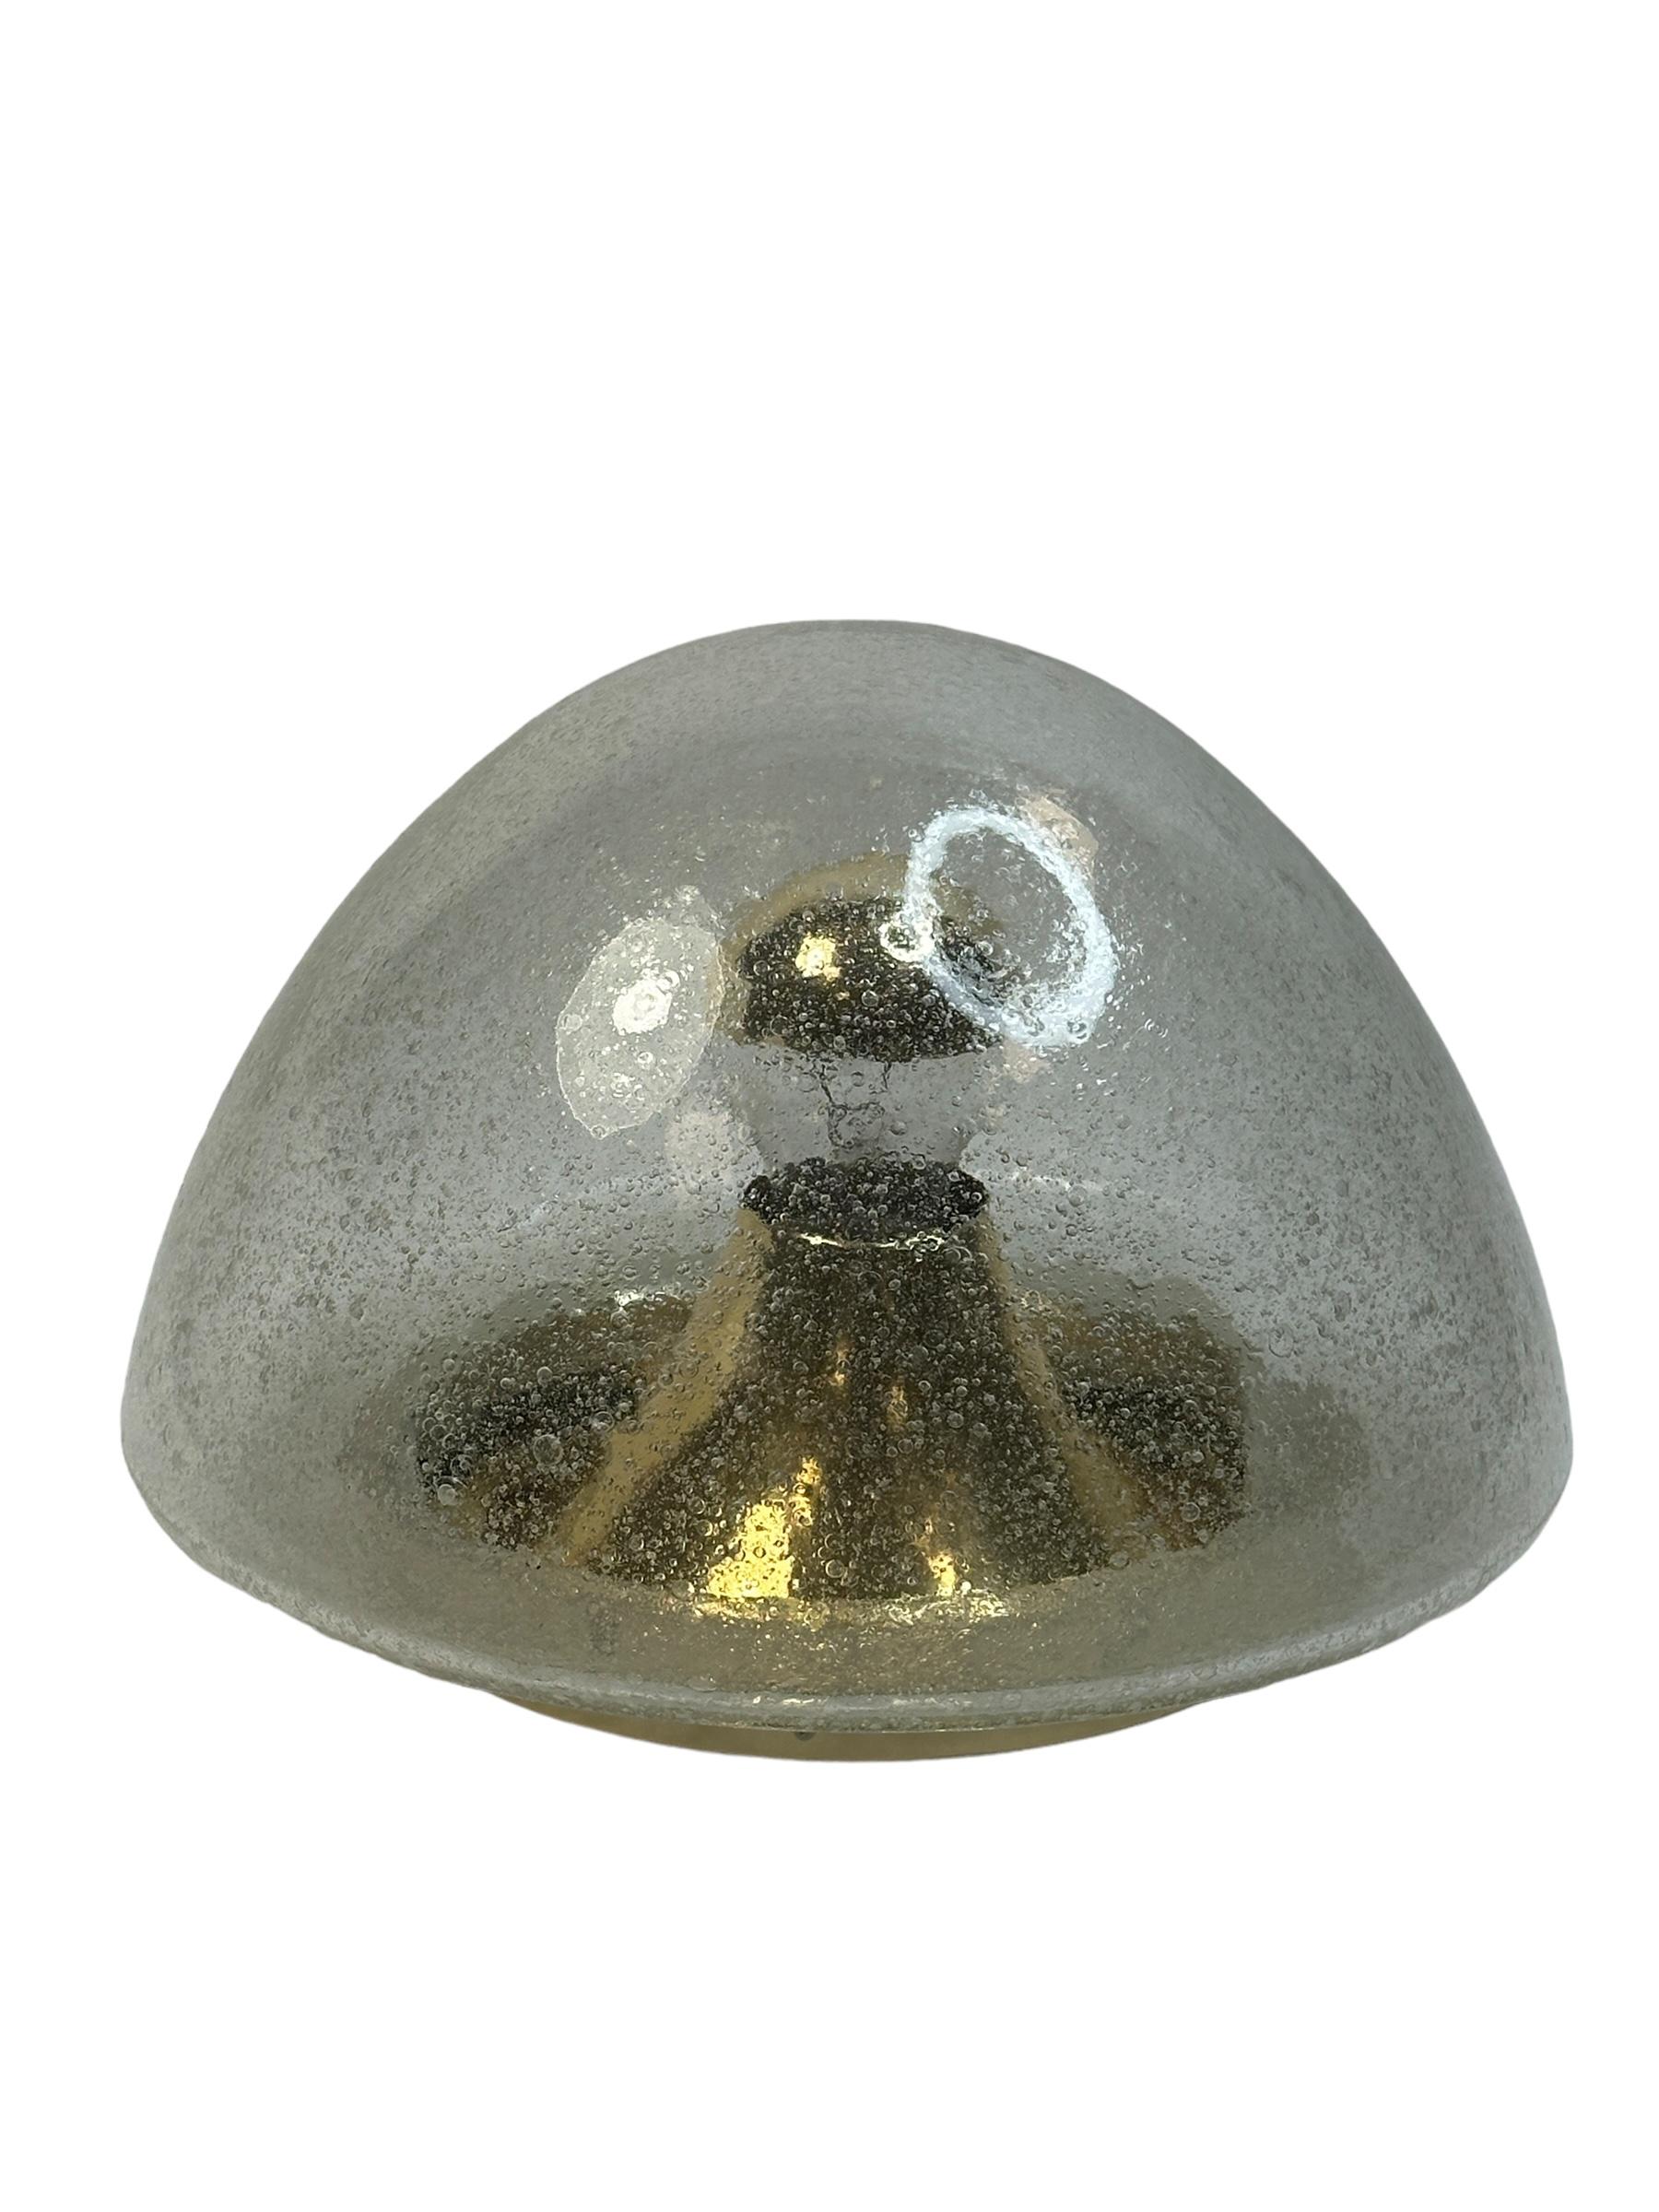 A gorgeous futuristic glass flush mount by Hoffmeister Leuchten. It can be used also as a wall light. The Fixture requires an European E27 / 110 Volt Edison bulb, up to 60 watts. Clear Murano glass with lots of little air bubbles, mounted on a brass